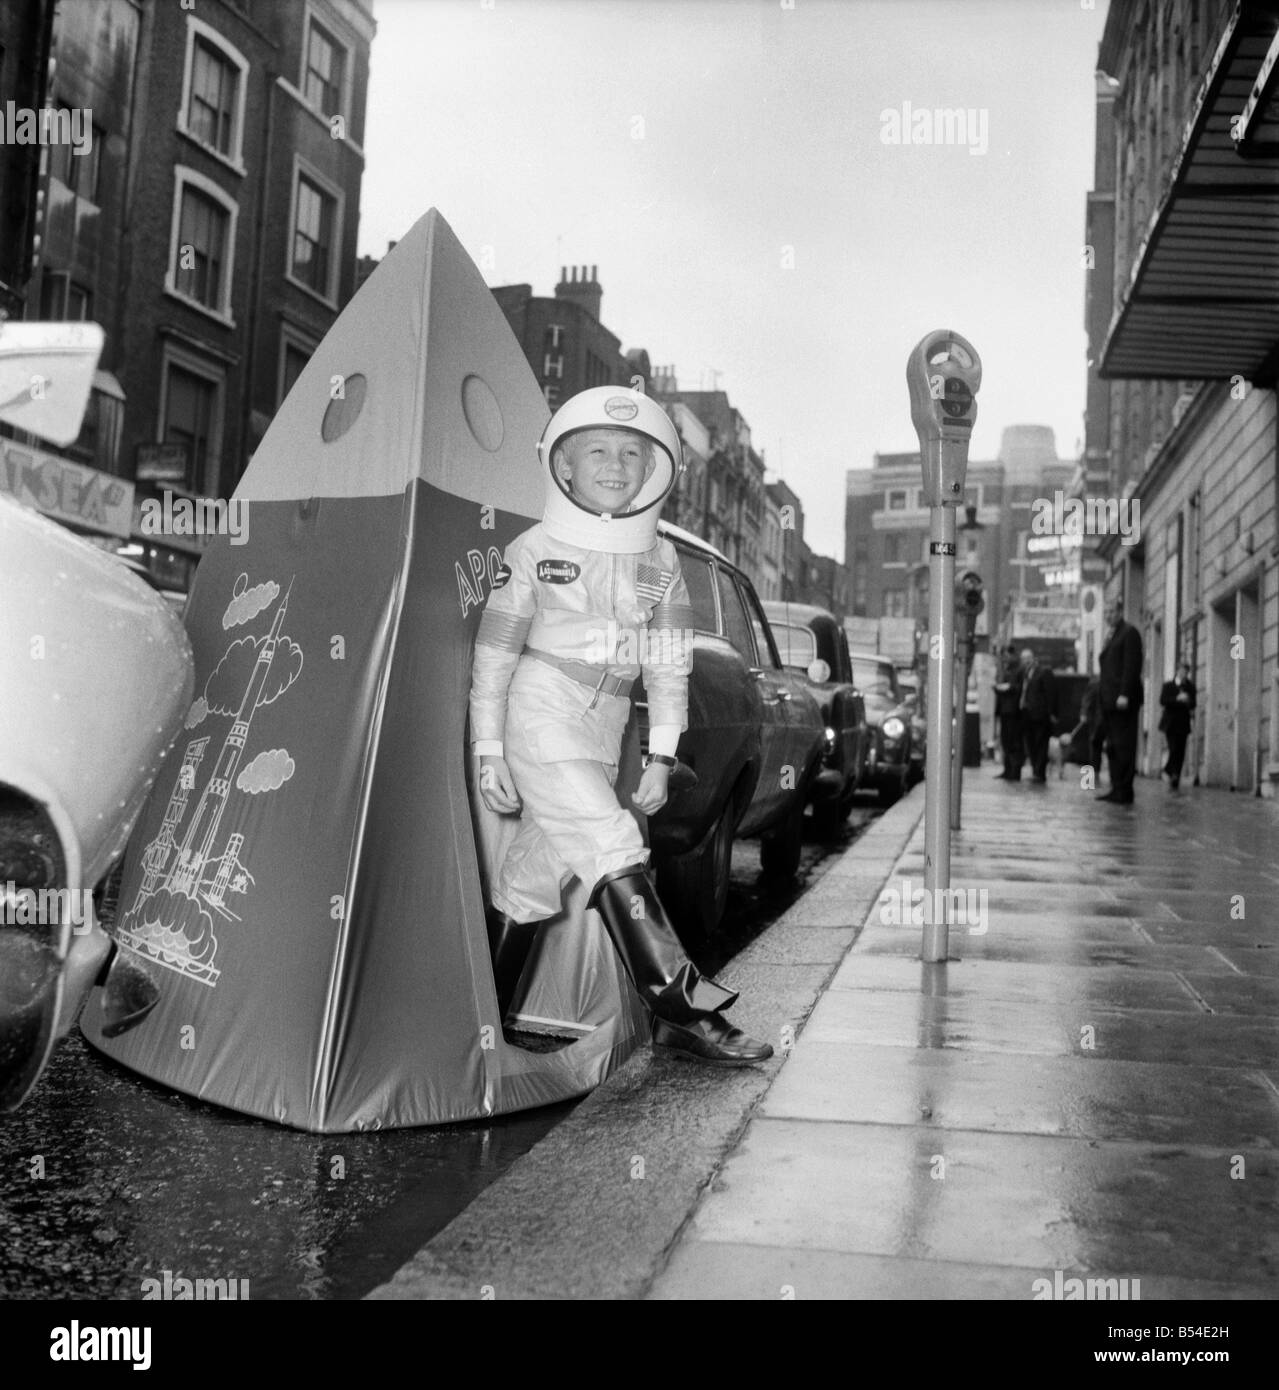 Children. Toys: The British Toy Manufacturers Association held a pre-Christmas display of new British Toys at the Waldorf Hotel, W.C.2. Up to the minute toy for young space travellers is this space-suit and Apollo Playhouse made by D.Dekker. 7year old Stephen Taylor of Chertsey tried the new space gear but appeared to have a little problem with parking his rocket in the street outside the hotel. November 1969 Z10631-006 Stock Photo